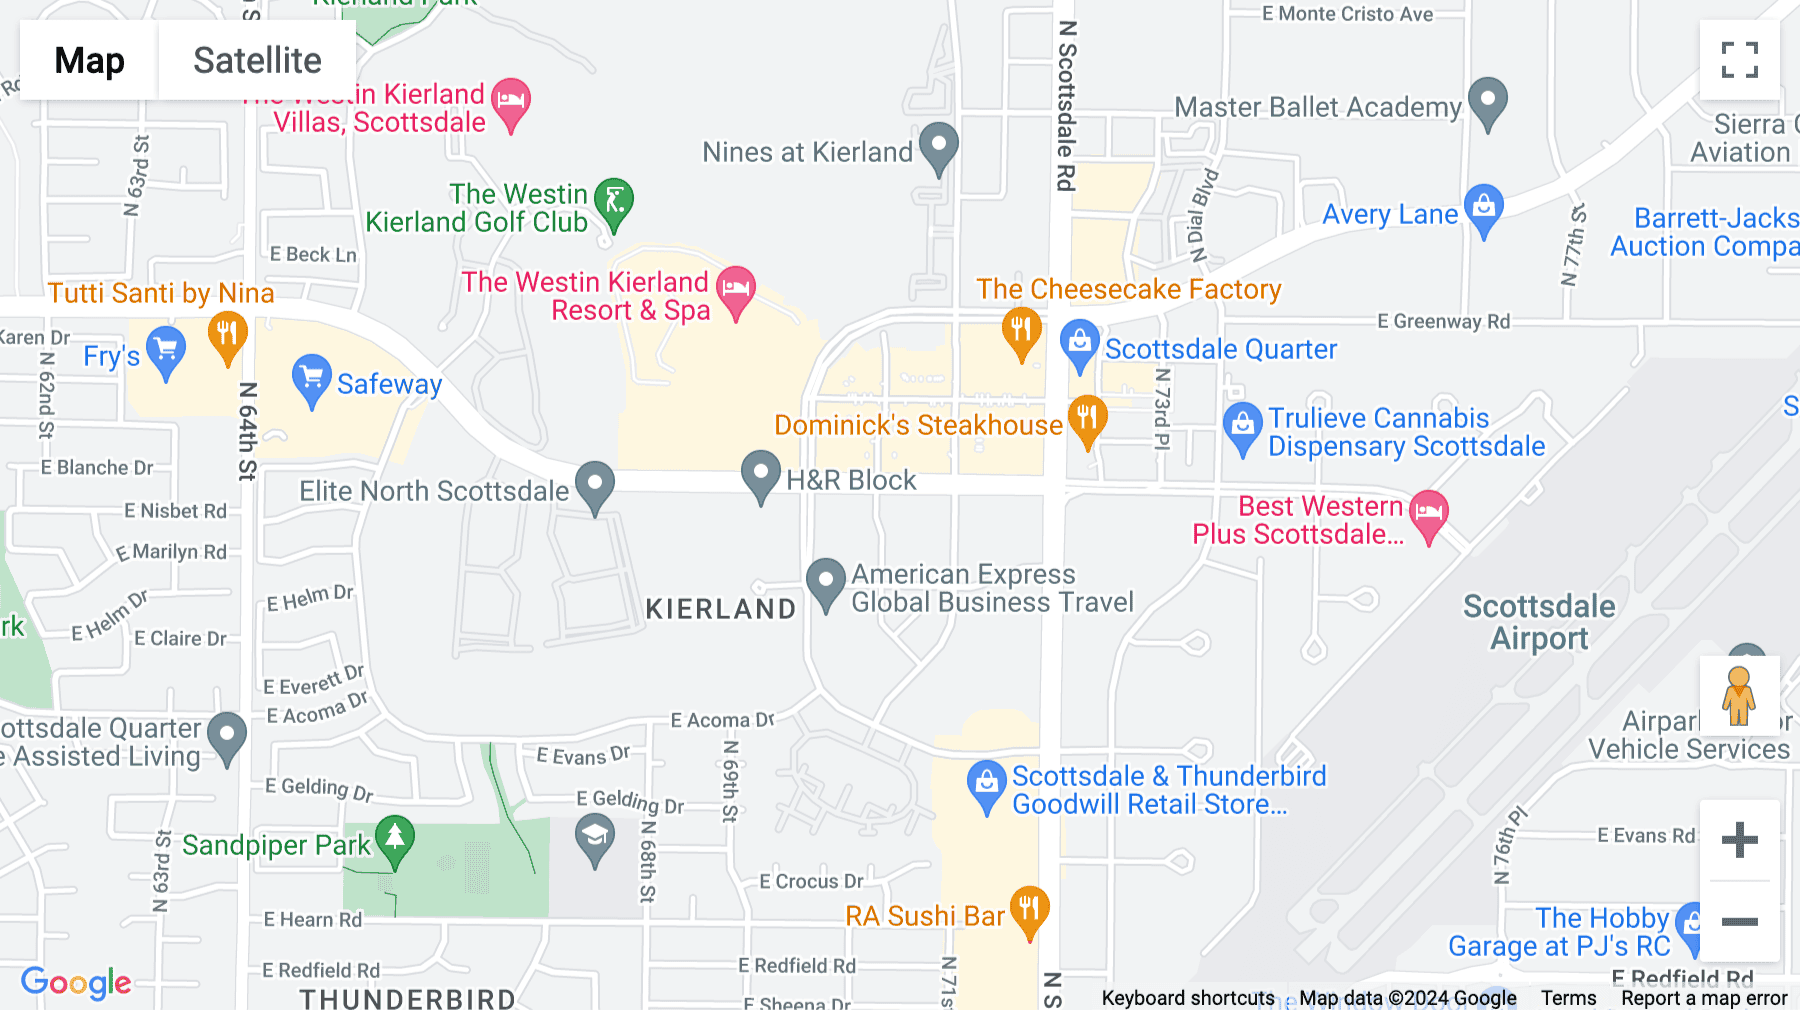 Click for interative map of 7047 East Greenway Parkway, Suite 250, Scottsdale